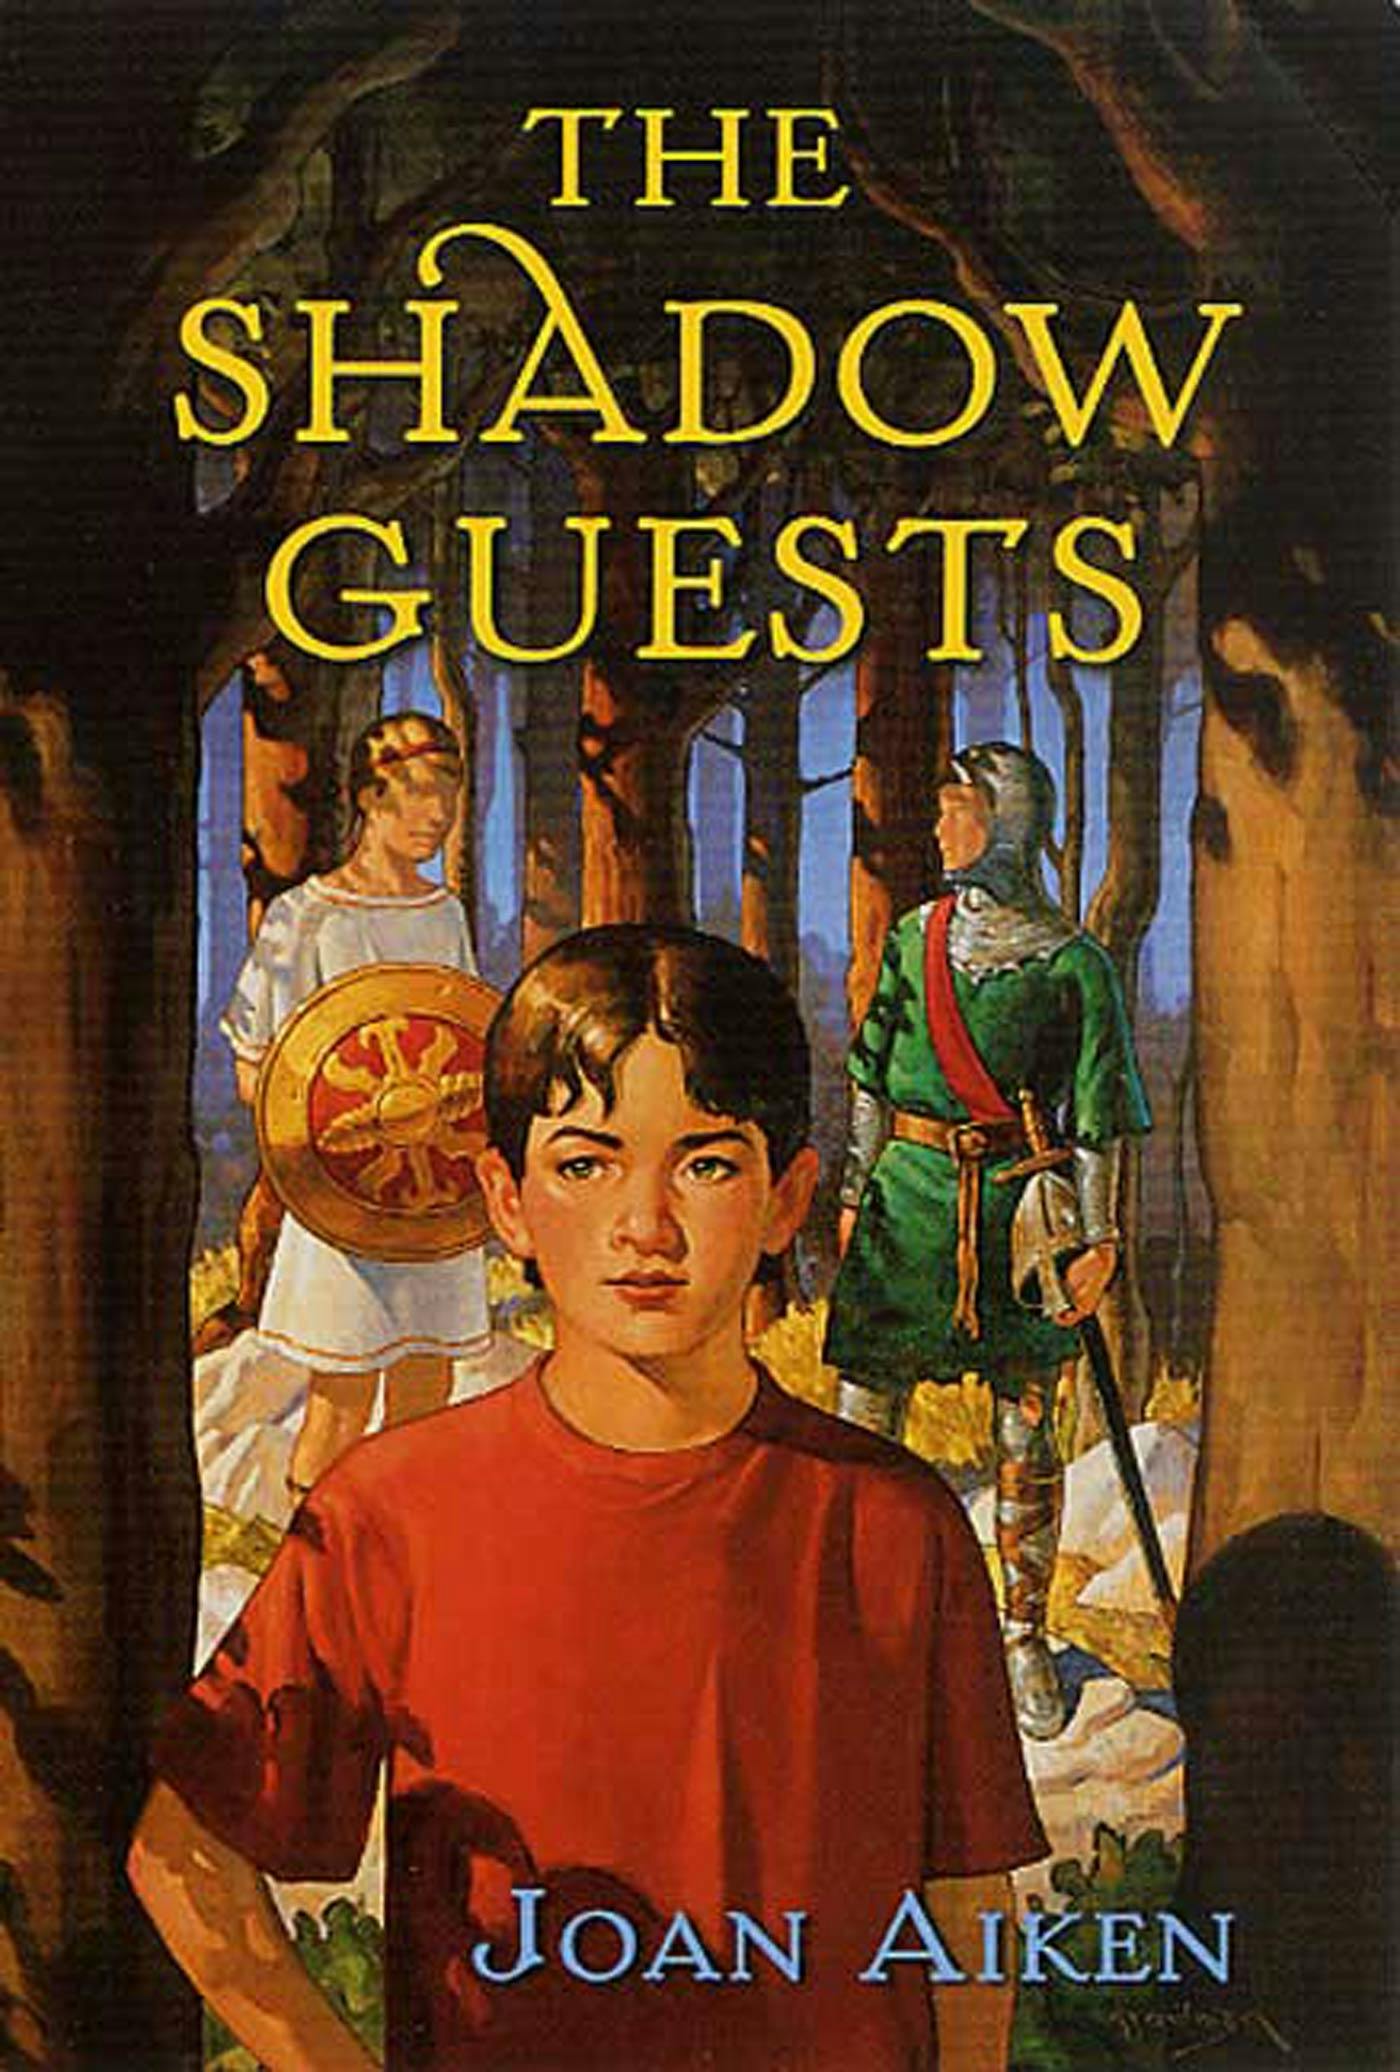 Cover for the book titled as: The Shadow Guests